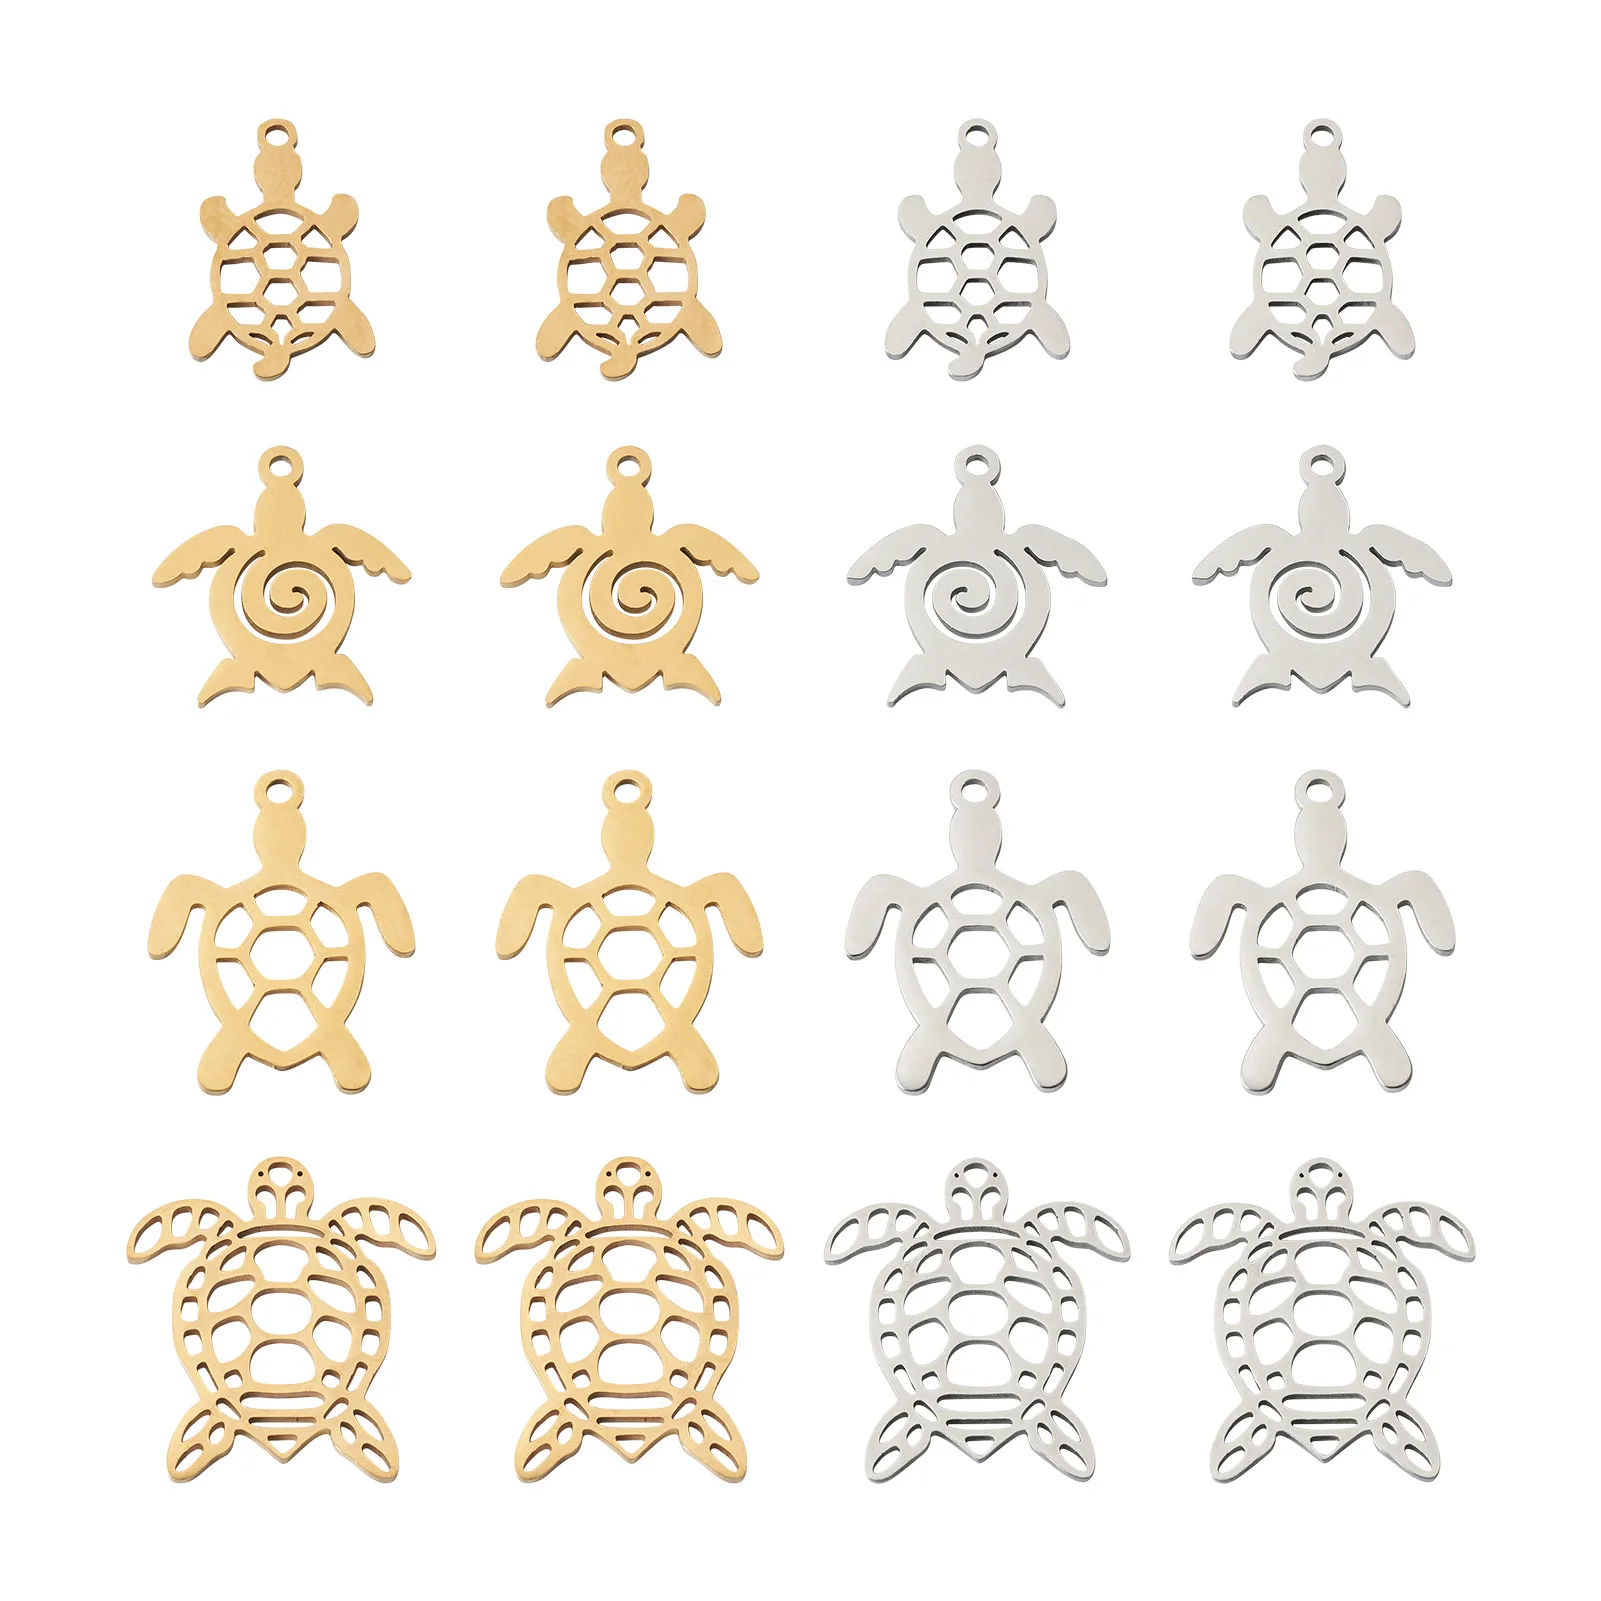 

16Pcs Sea Turtle Tortoise Charms 201 Stainless Steel Filigree Joiners Links Pendant for Diy Necklace Earring Jewelry Making Gift